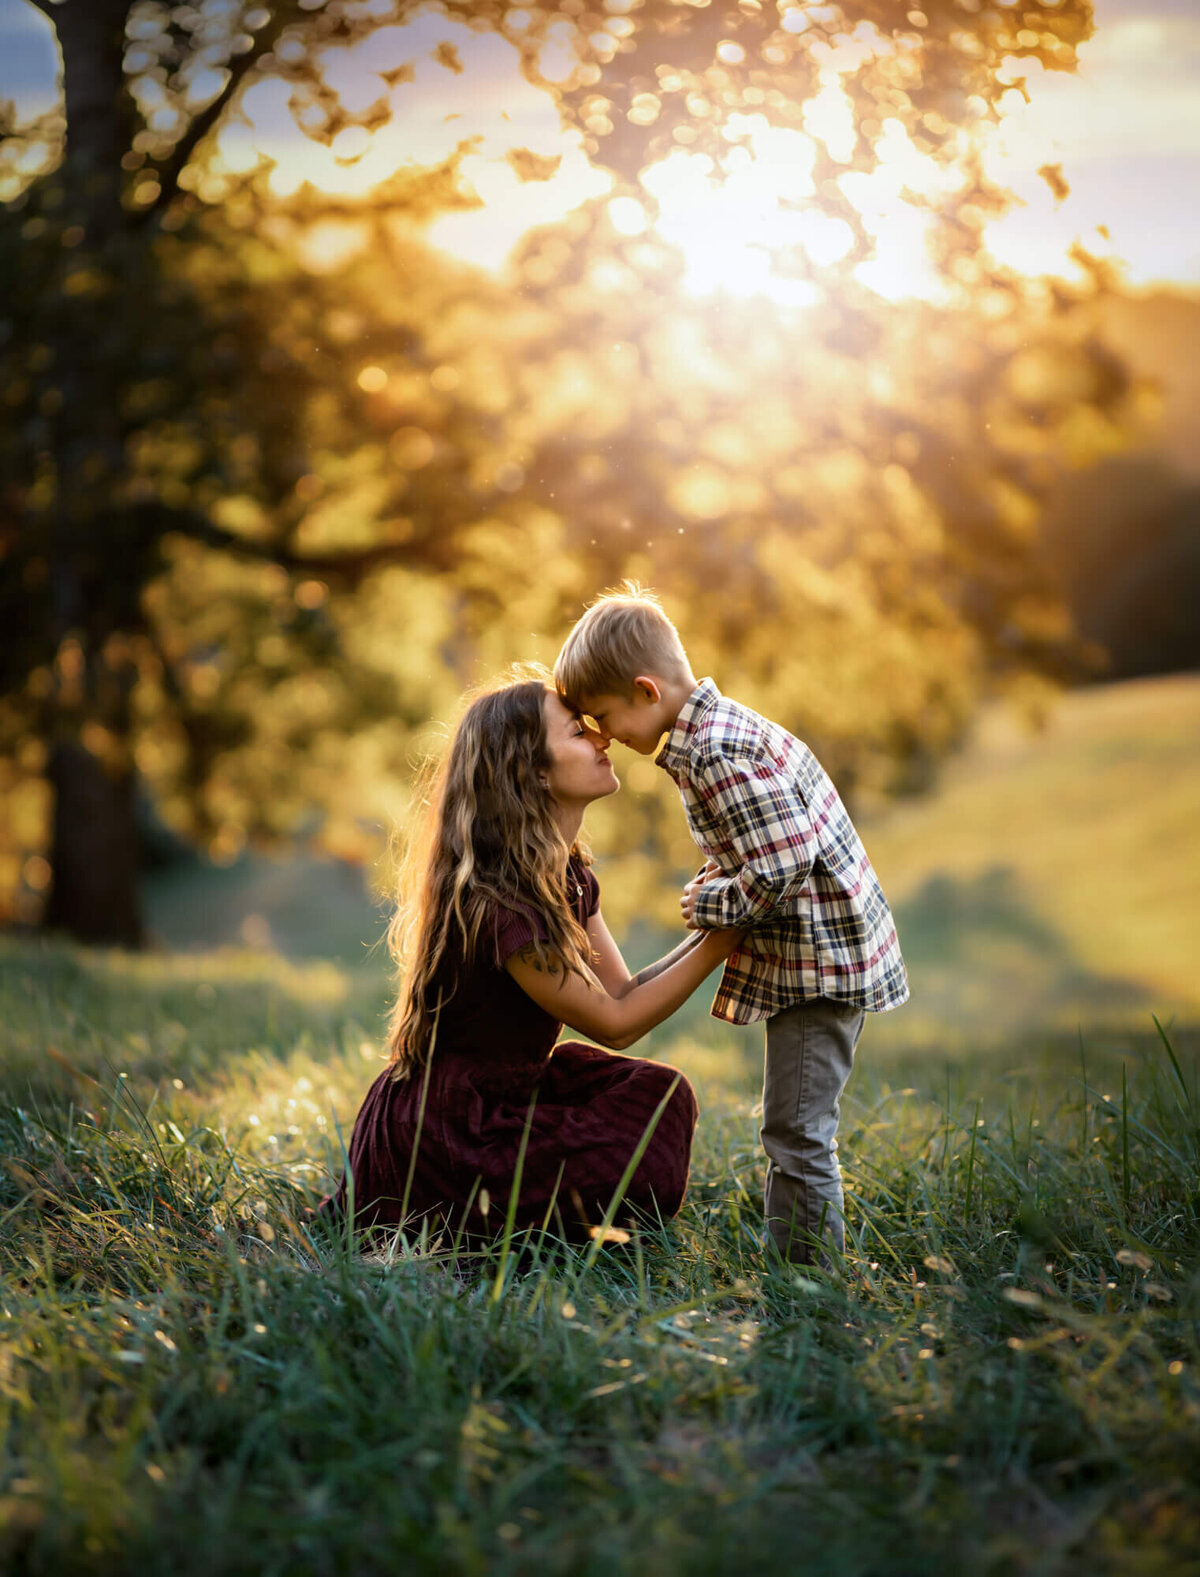 A mom in a maroon dress touching foreheads with her son while kneeling in the grass at sunset